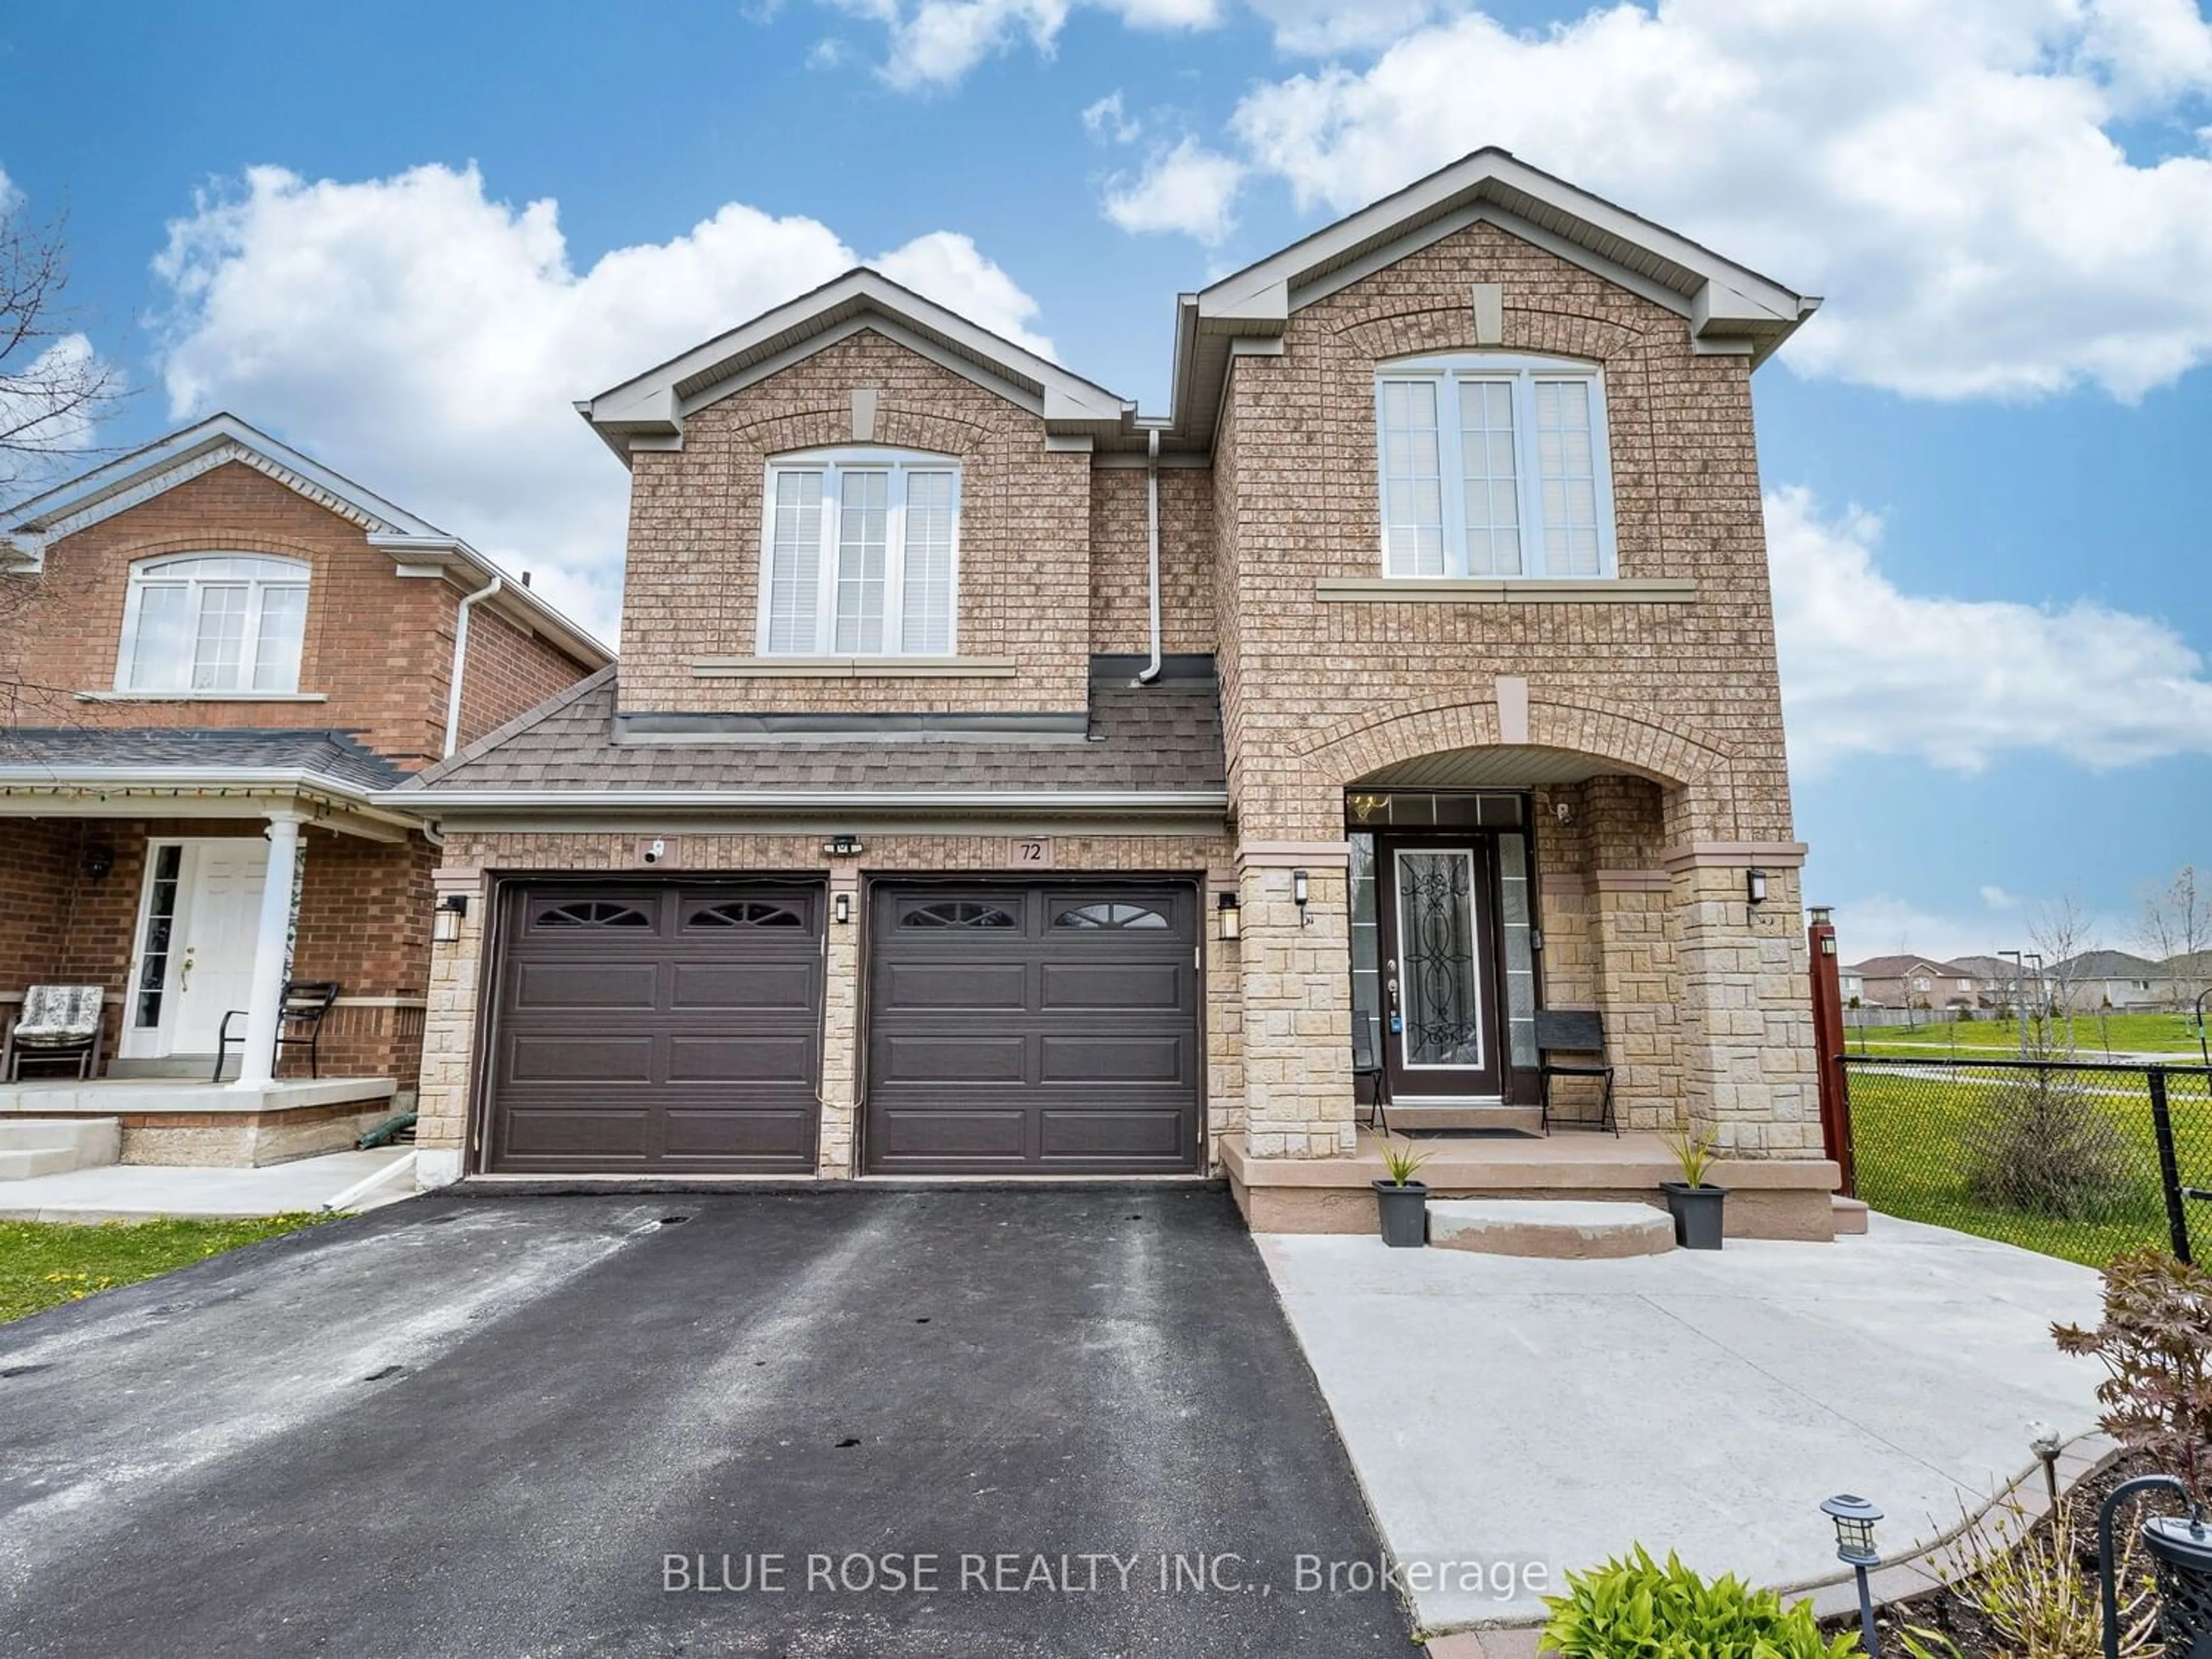 Home with brick exterior material for 72 Trudelle Cres, Brampton Ontario L7A 2Z2